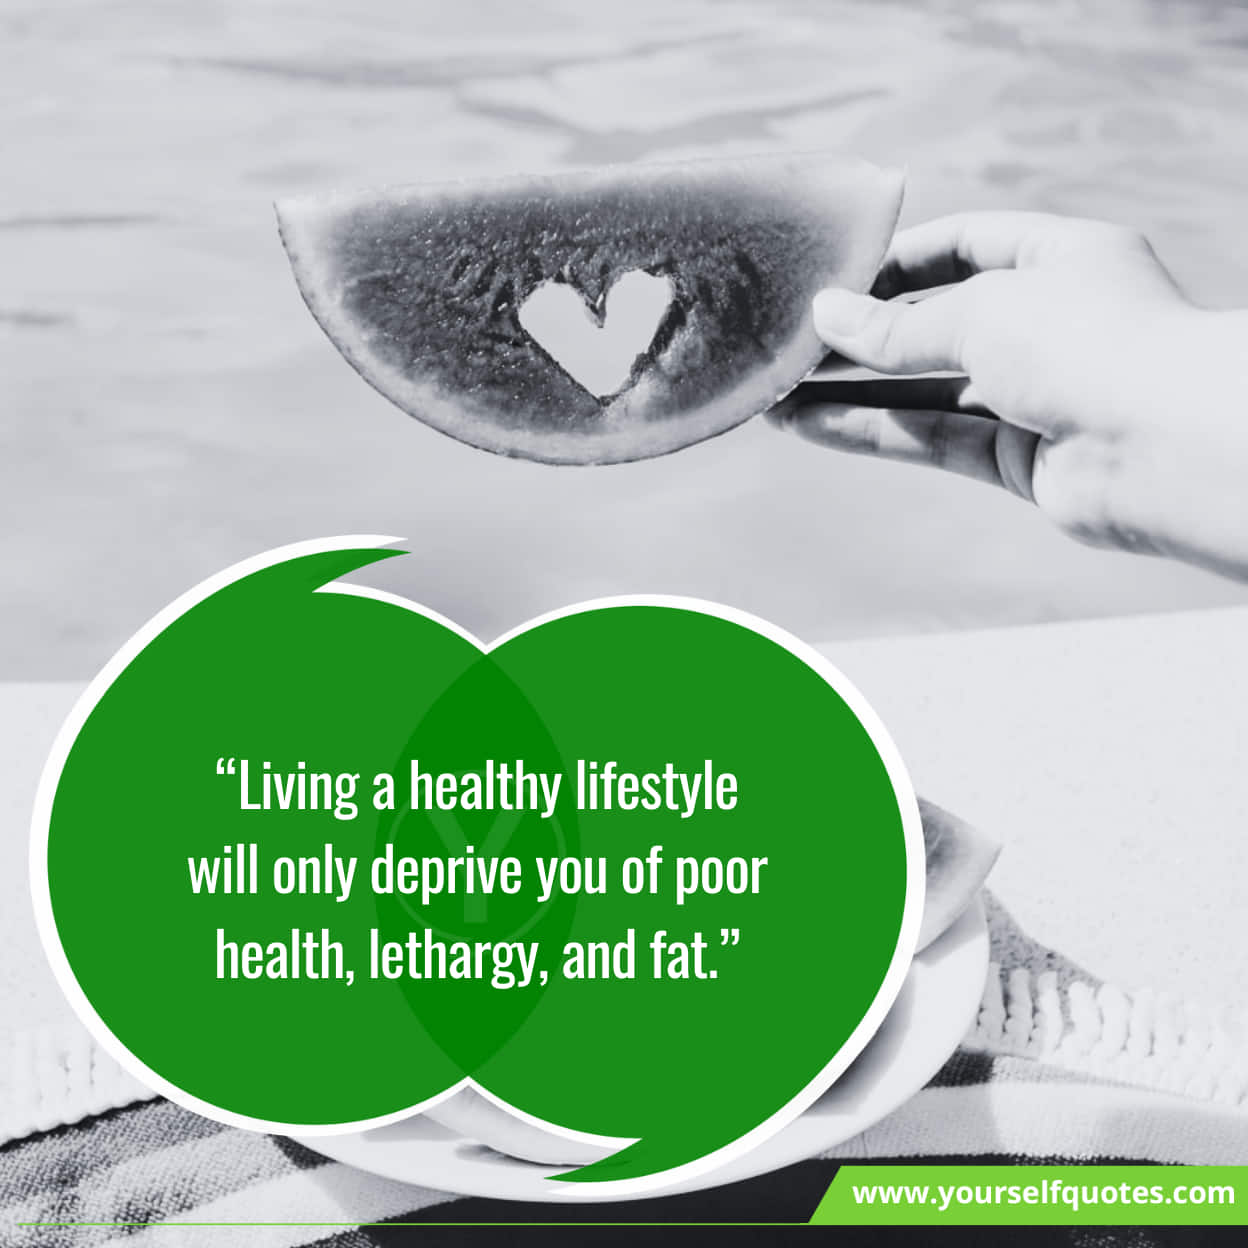 Best Health Quotes To Stay Fit